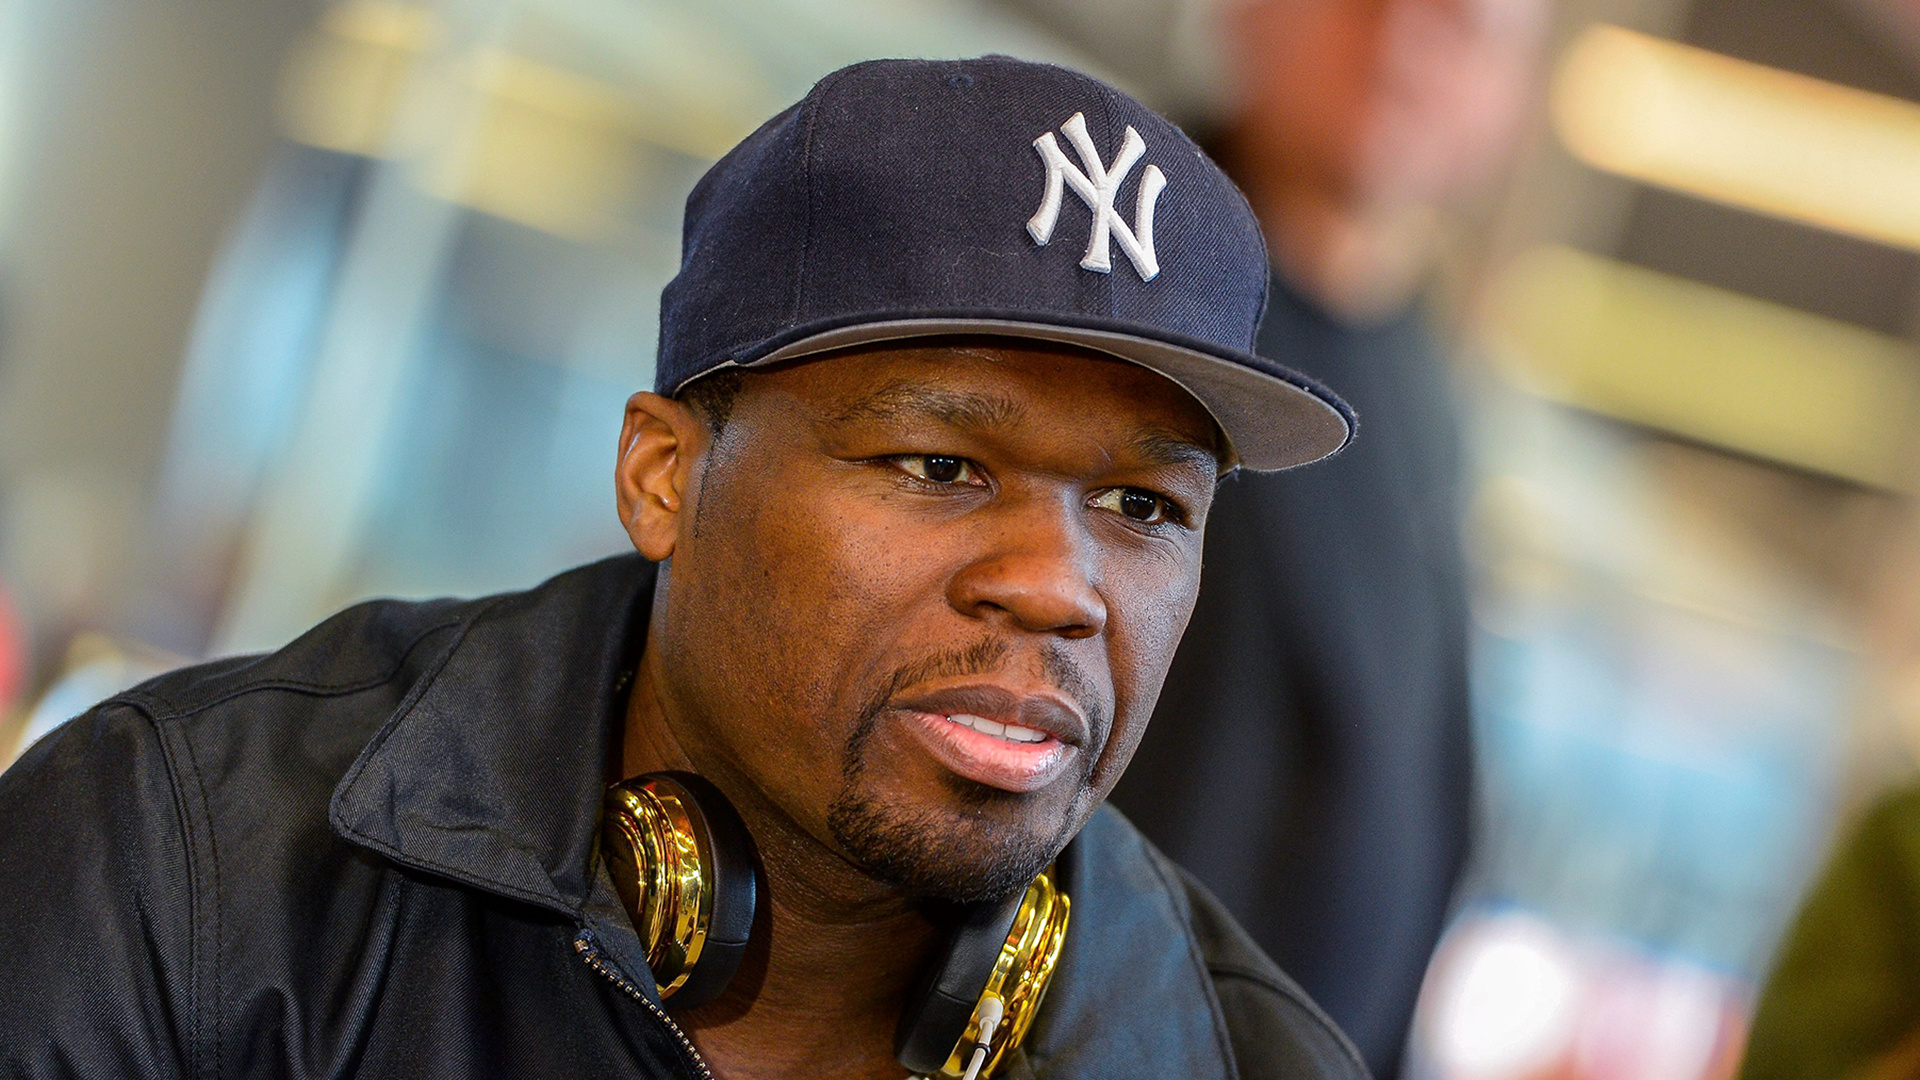 50 Cent: Get Rich or Die Tryin' debuted and peaked at number one on the Billboard 200. 1920x1080 Full HD Background.